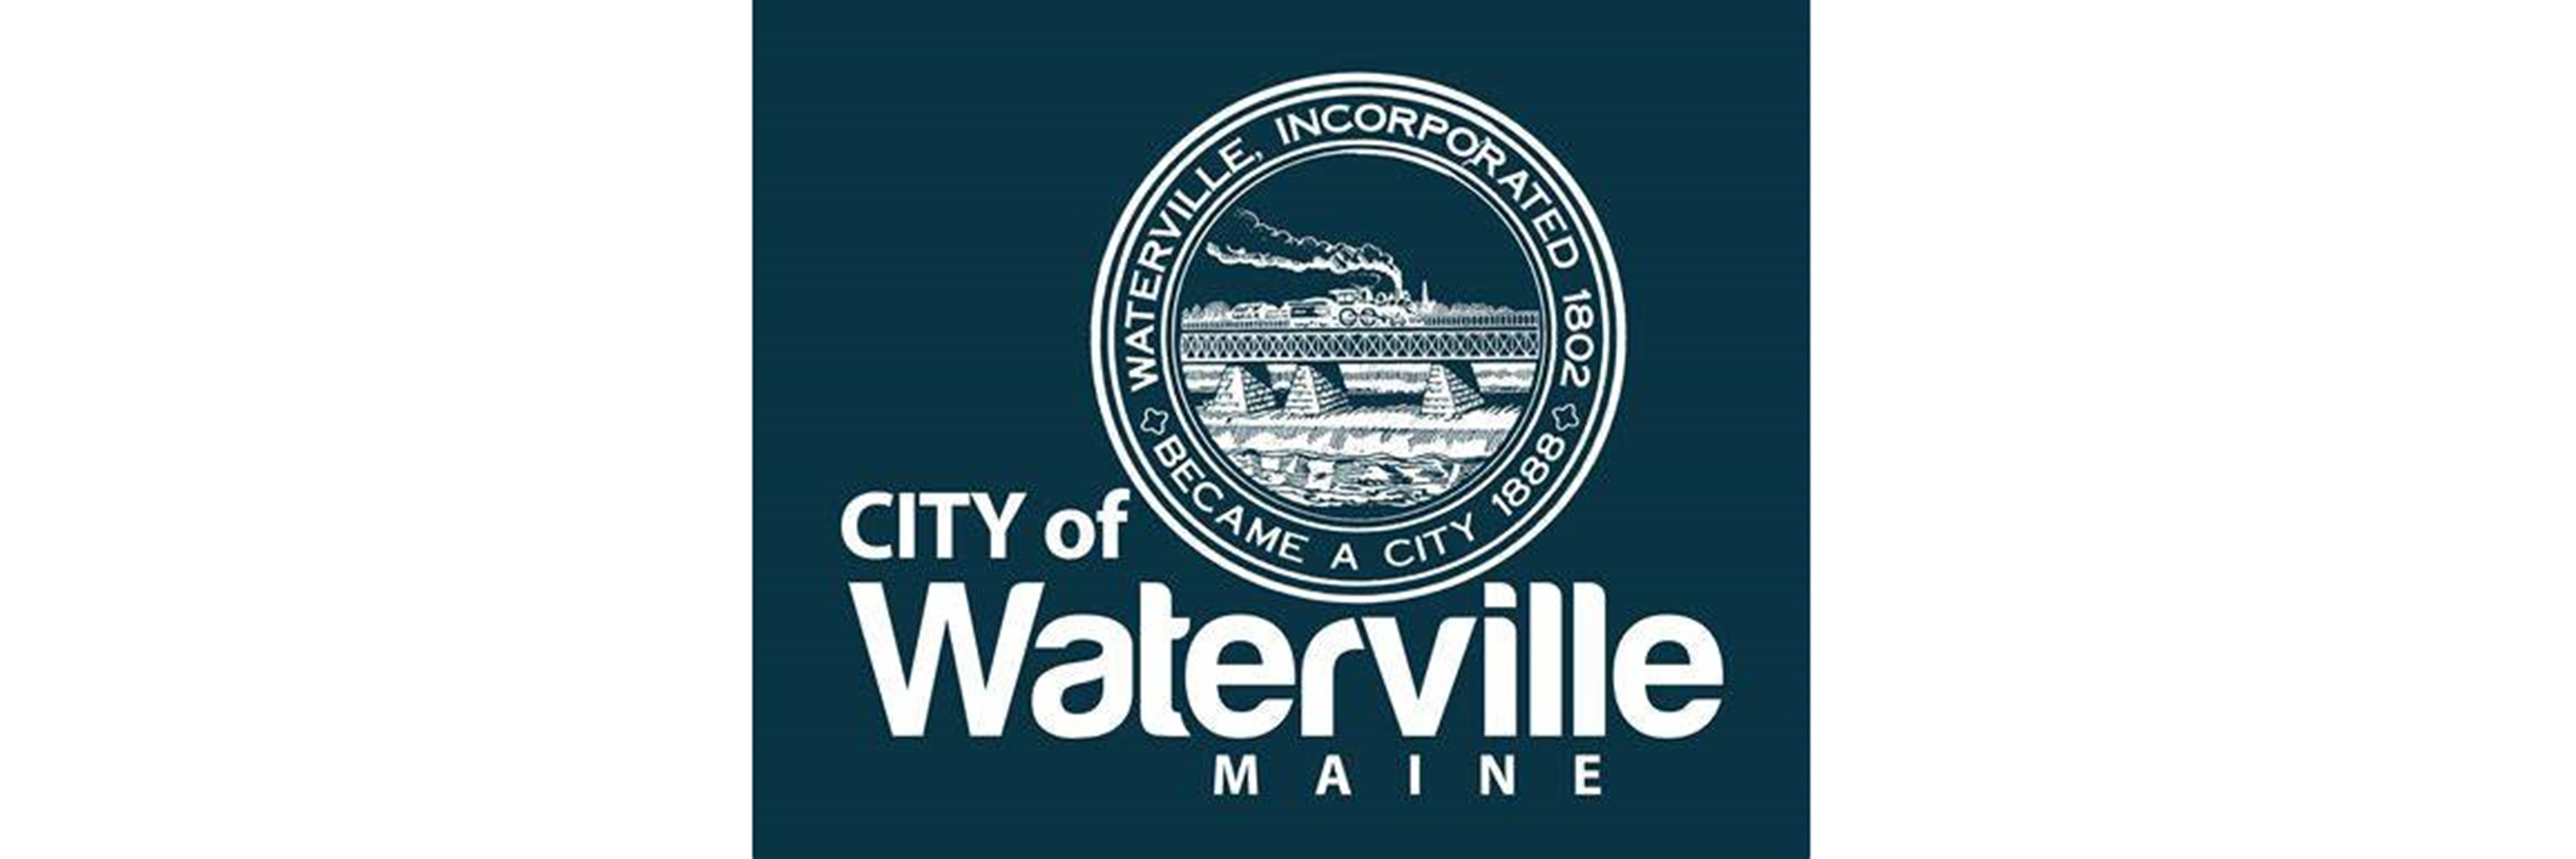 City of Waterville